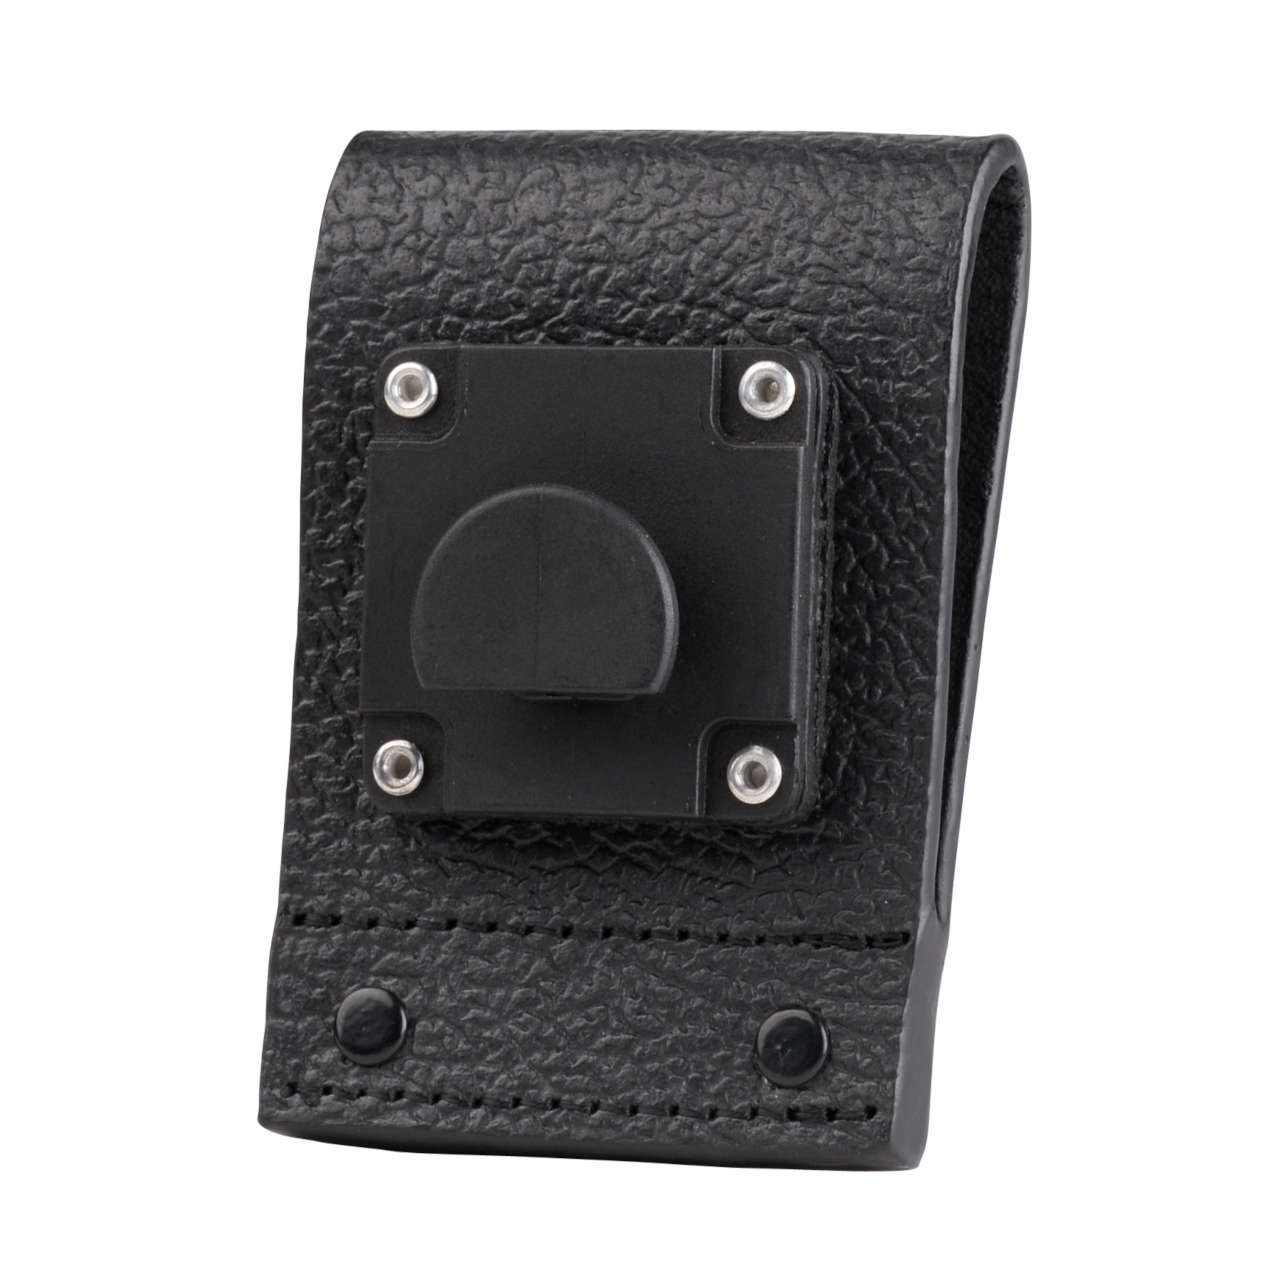 Motorola Hard Leather Carry Case with 2.5" Swivel Belt Loop for Non-Display Radio PMLN5868A